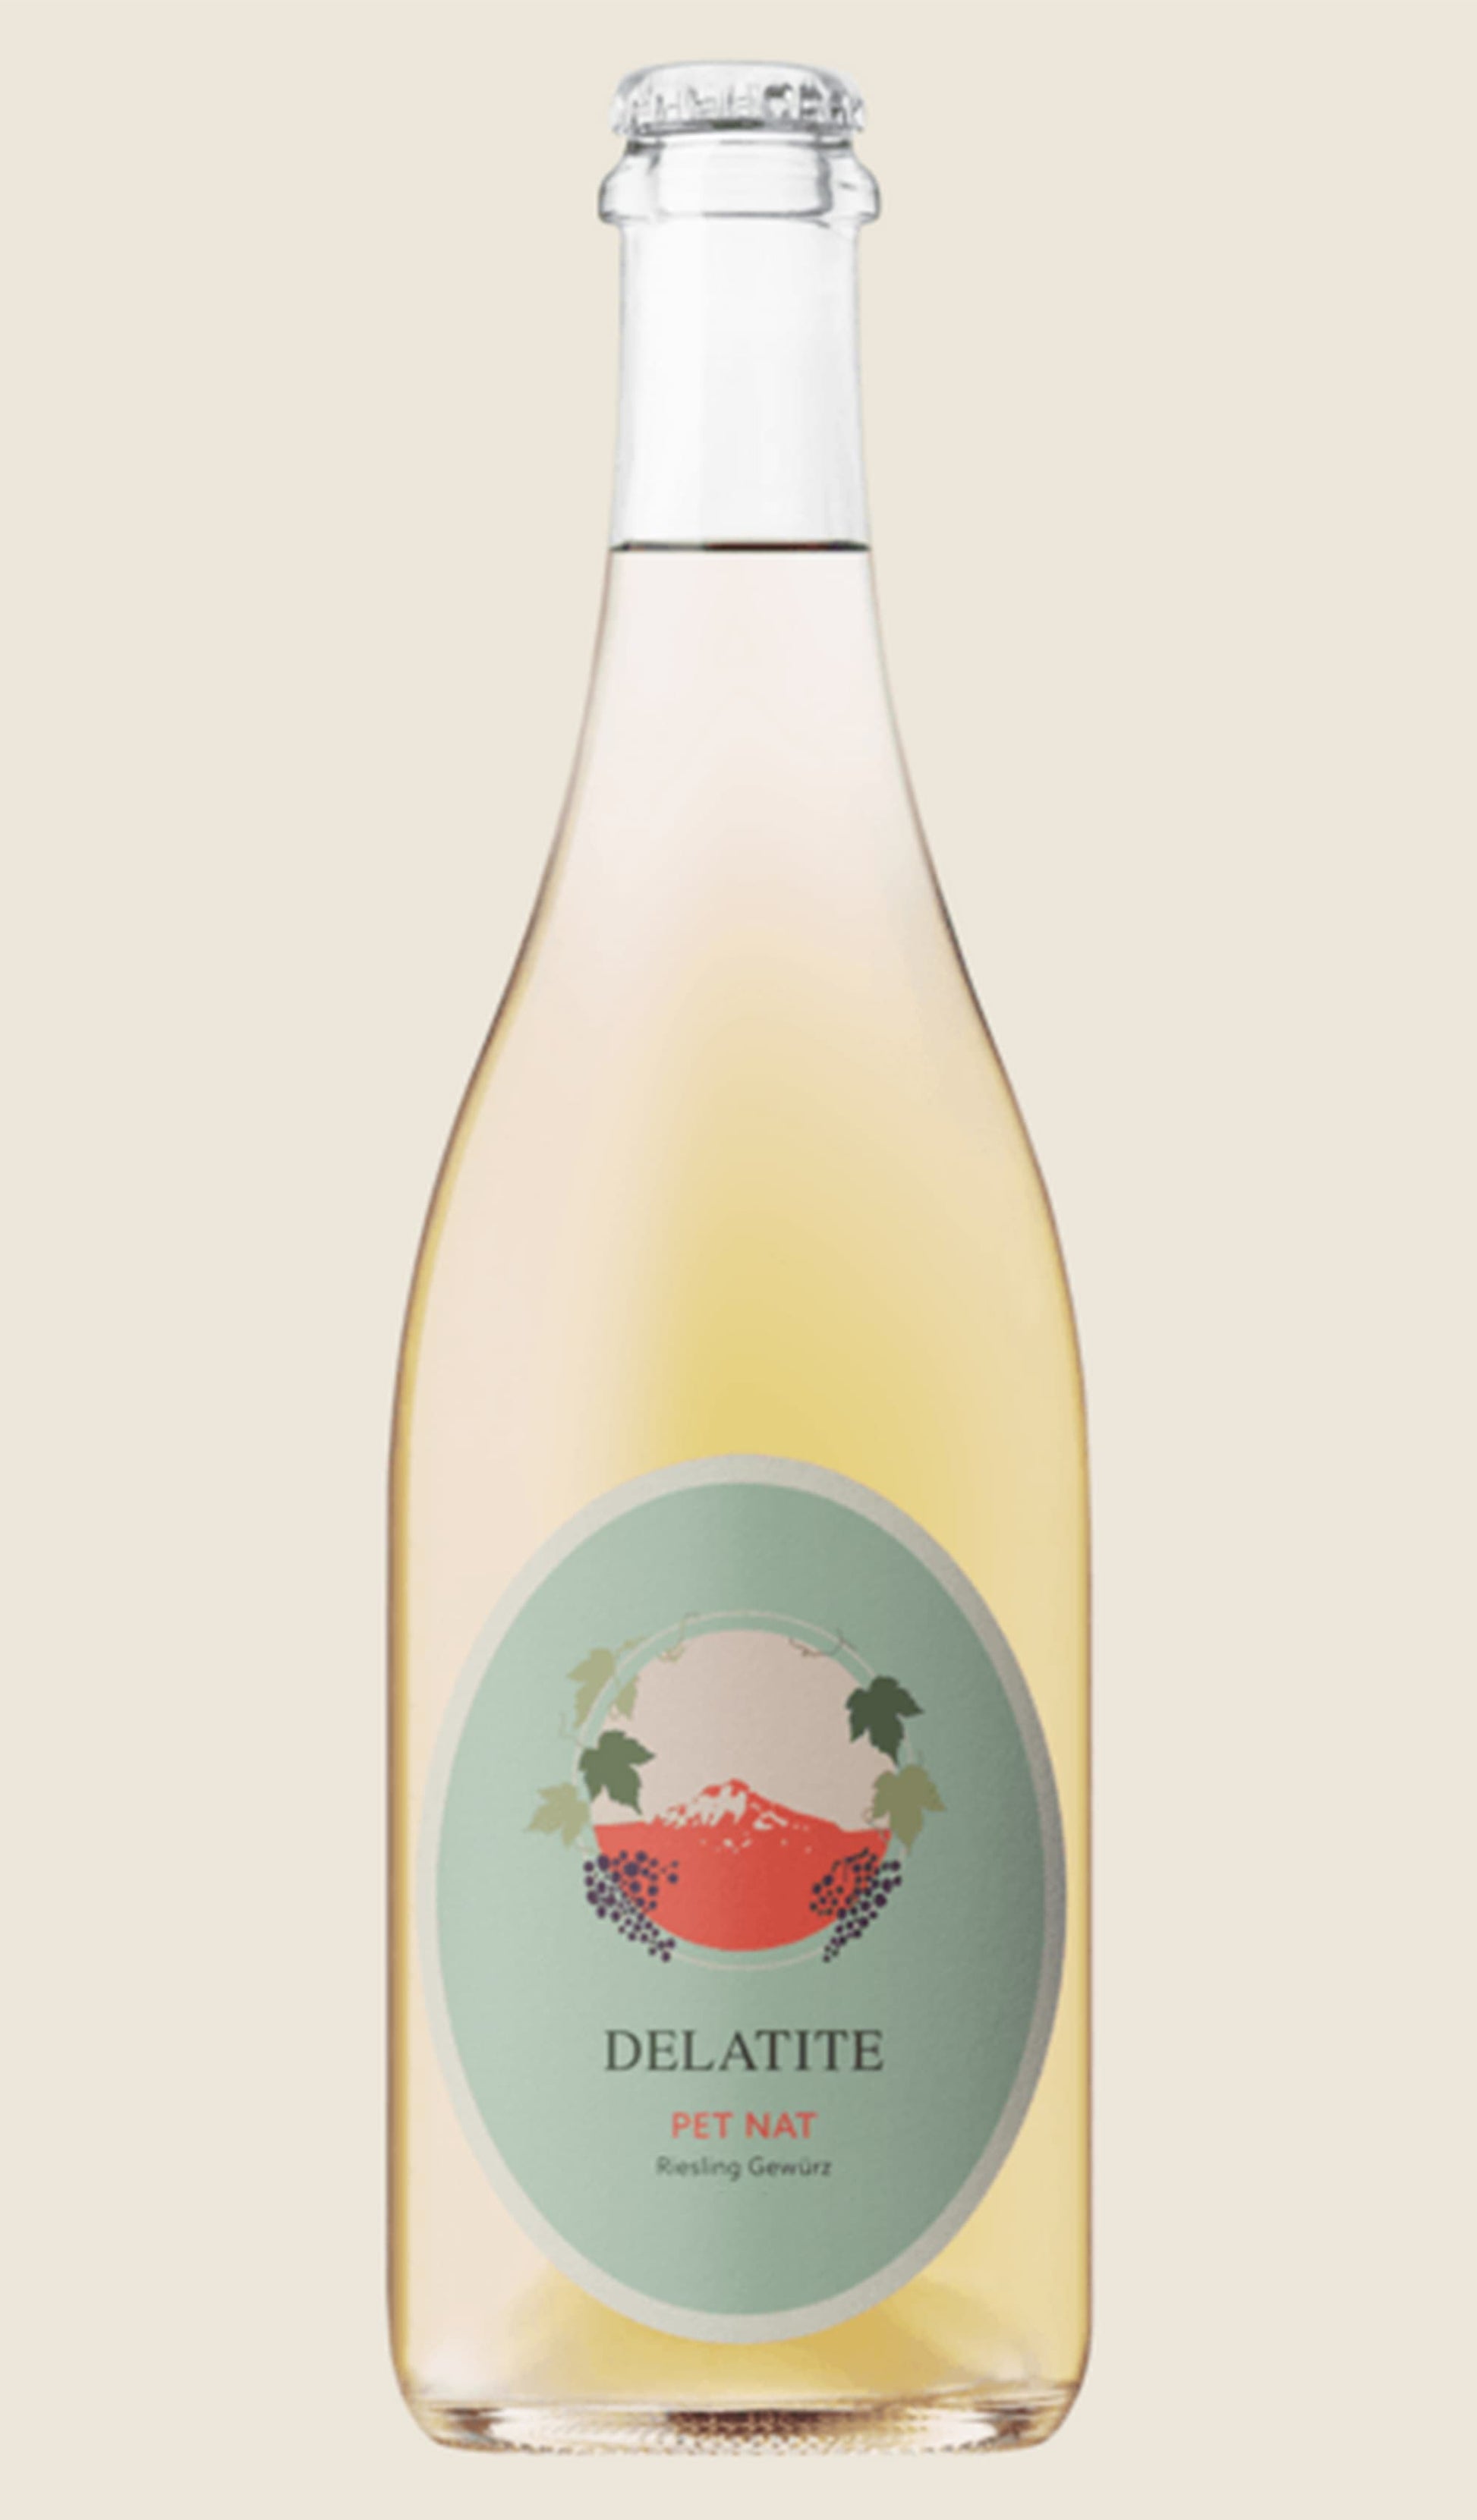 Find out more or buy Delatite Pet Nat Riesling Gewurtztraminer 2022 online at Wine Sellers Direct - Australia’s independent liquor specialists.